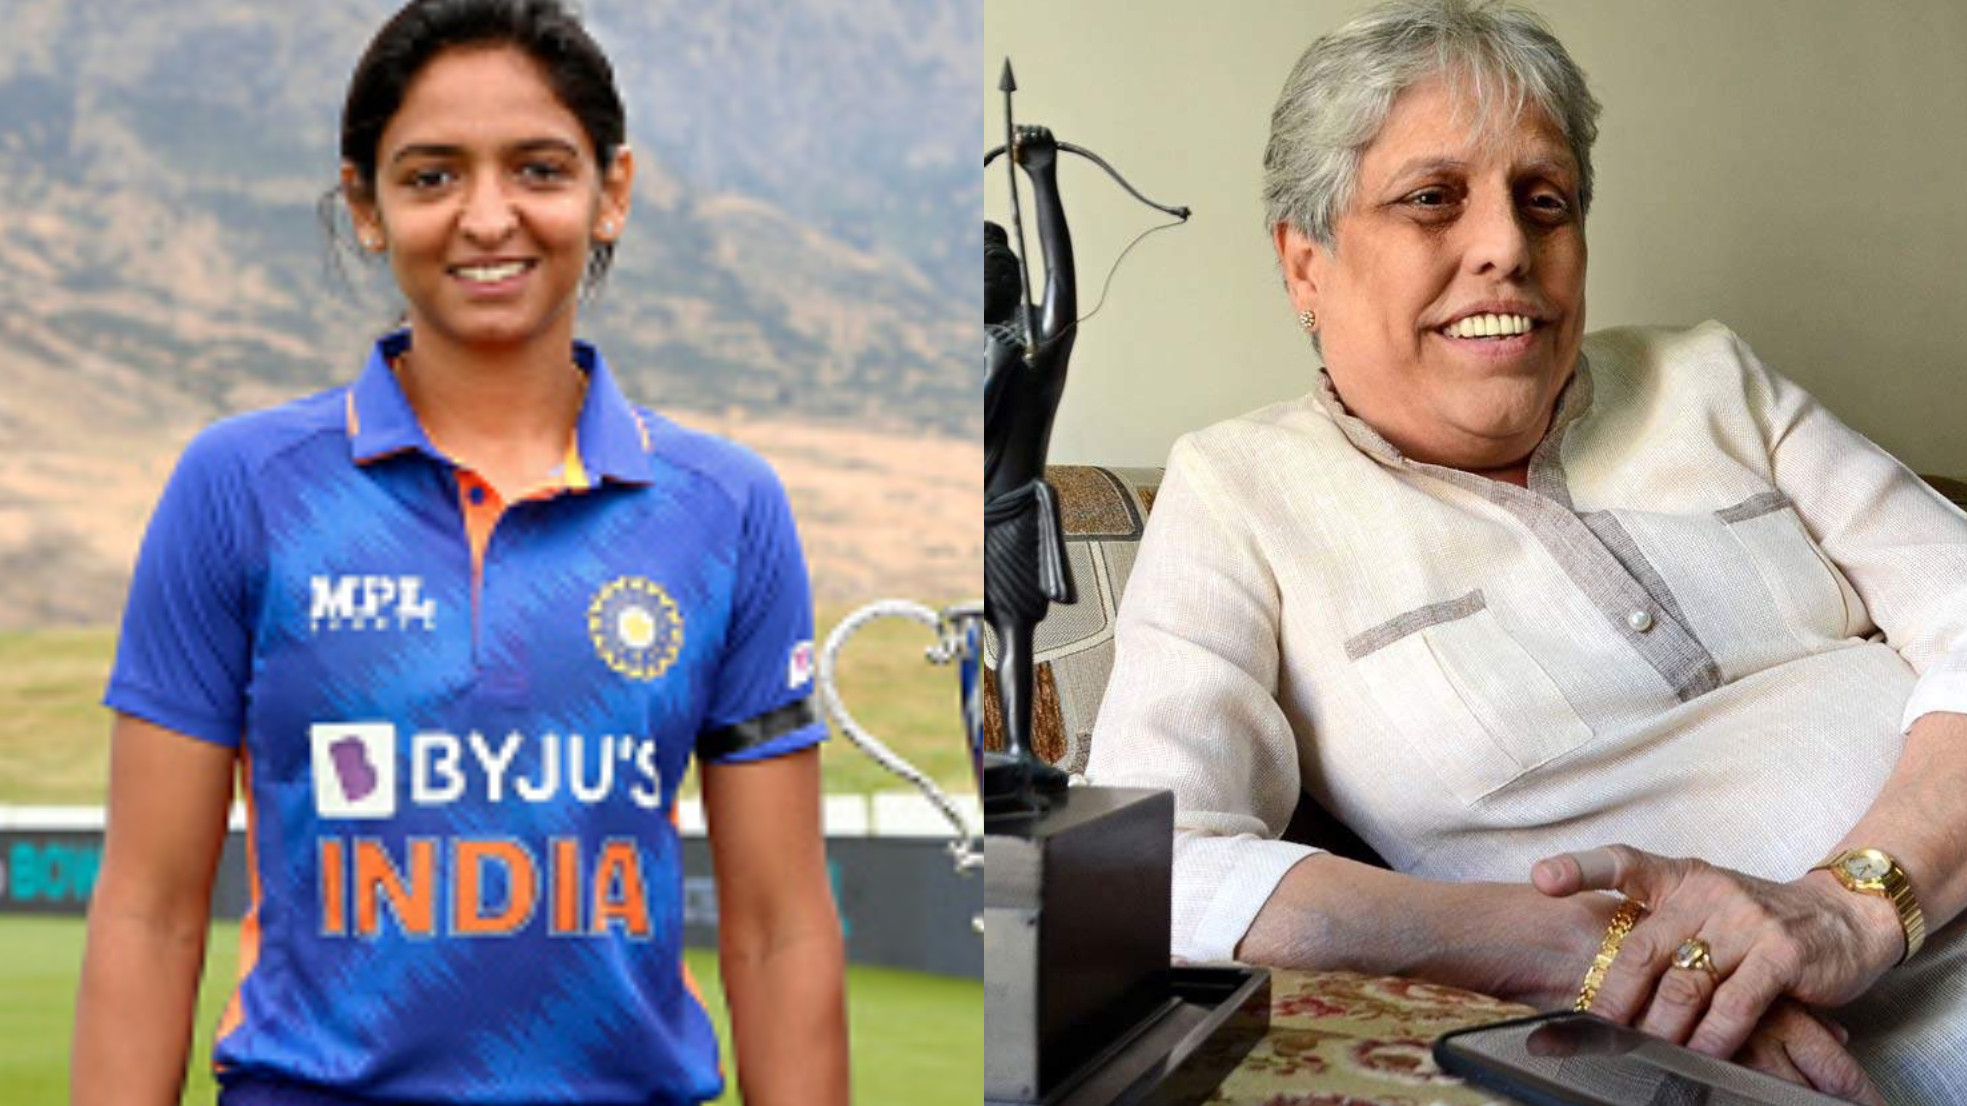 “She can’t survive only on her score of 171*” - Diana Edulji calls for Harmanpreet Kaur to be dropped from Indian team